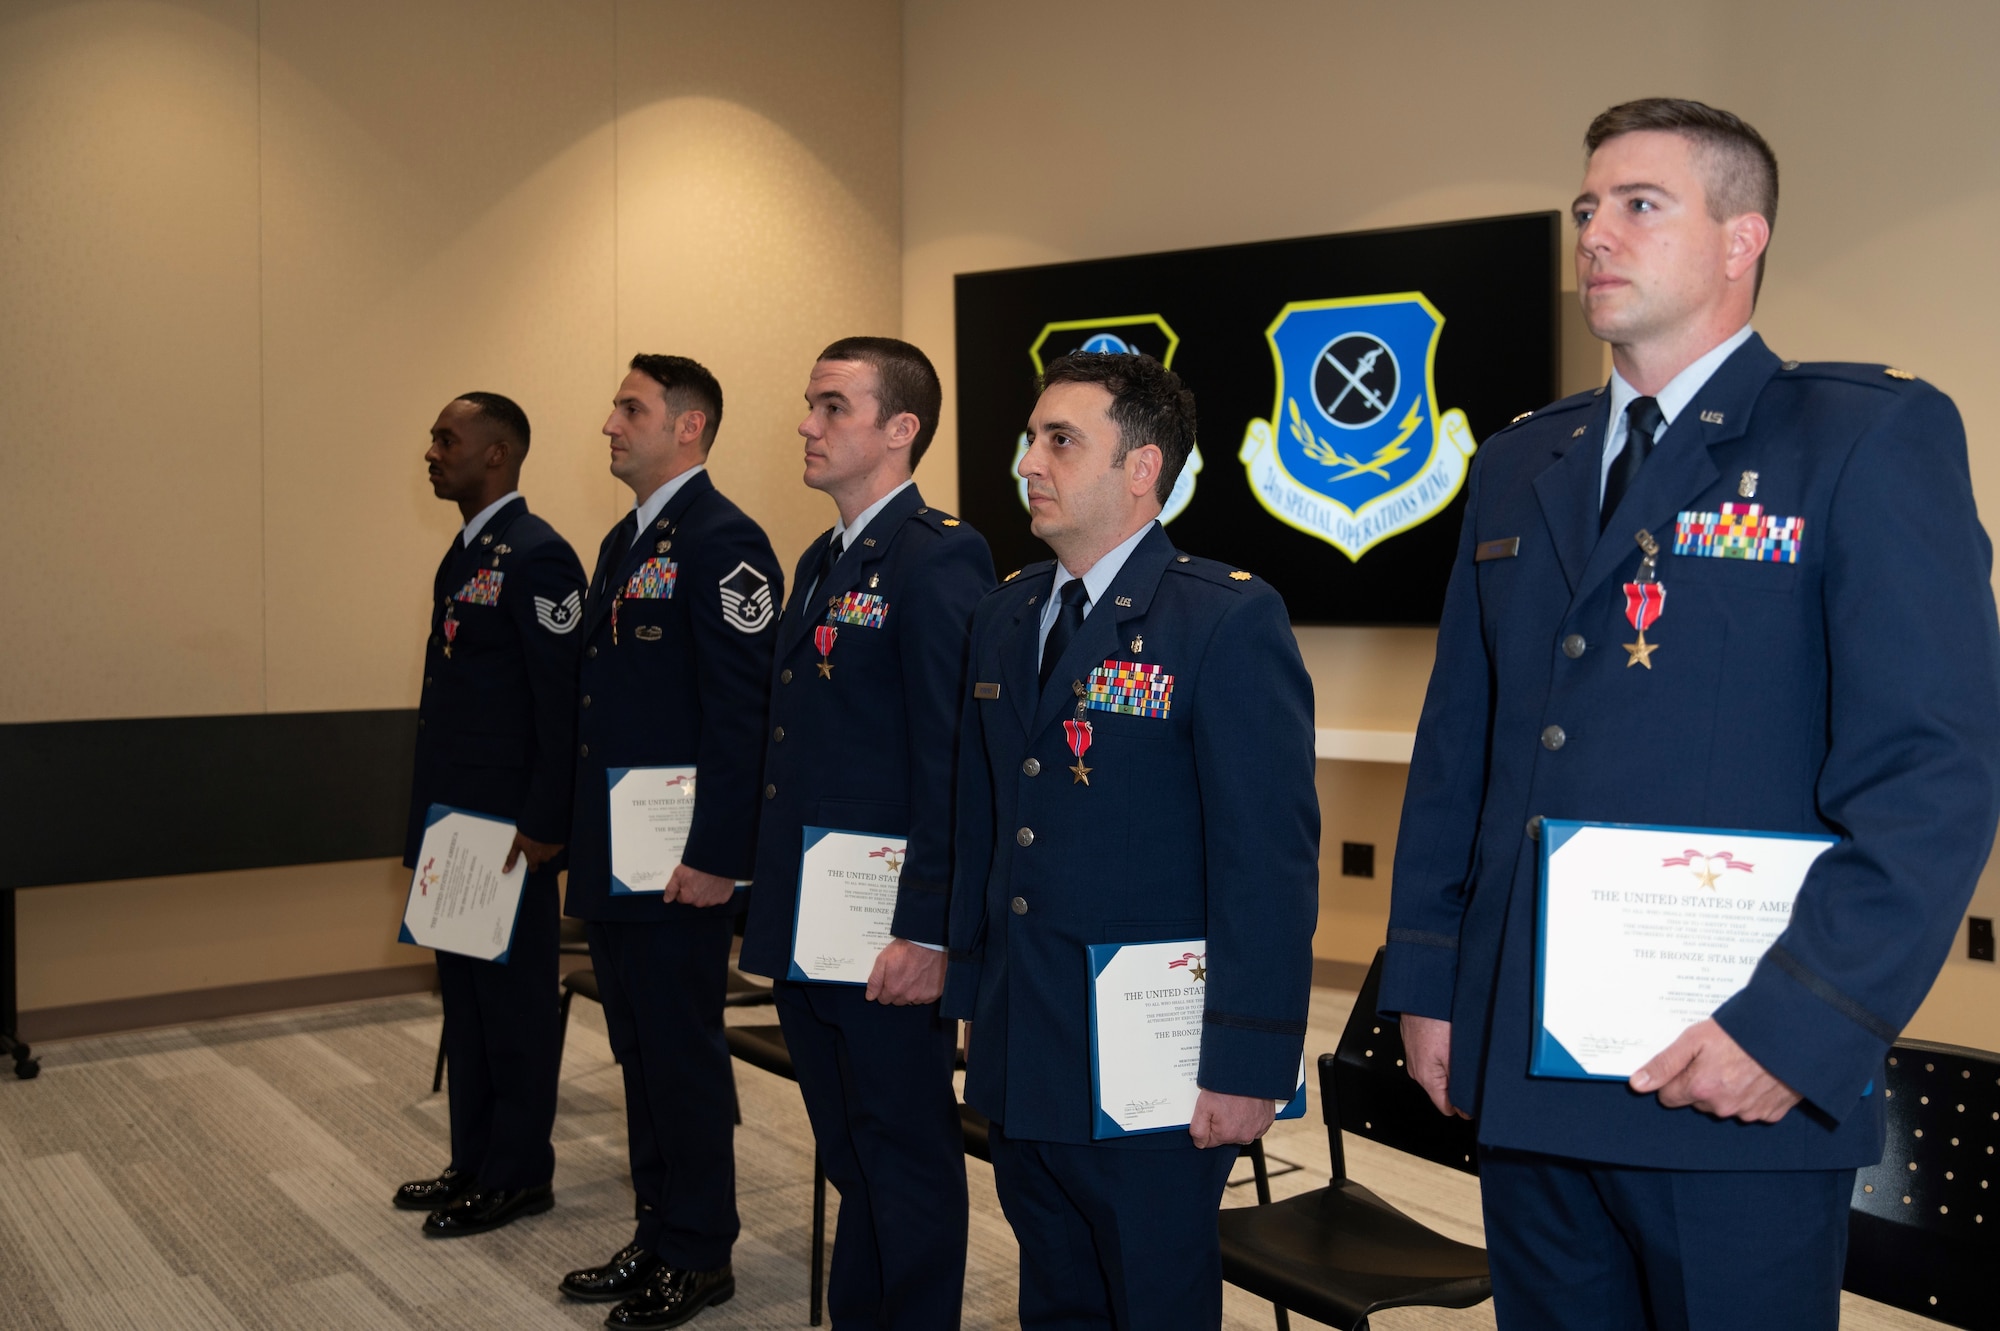 A ceremony was held at the UAB hospital to present a six-member Special Operations Surgical Team Bronze Star Medals for their heroic actions in Kabul, Afghanistan.